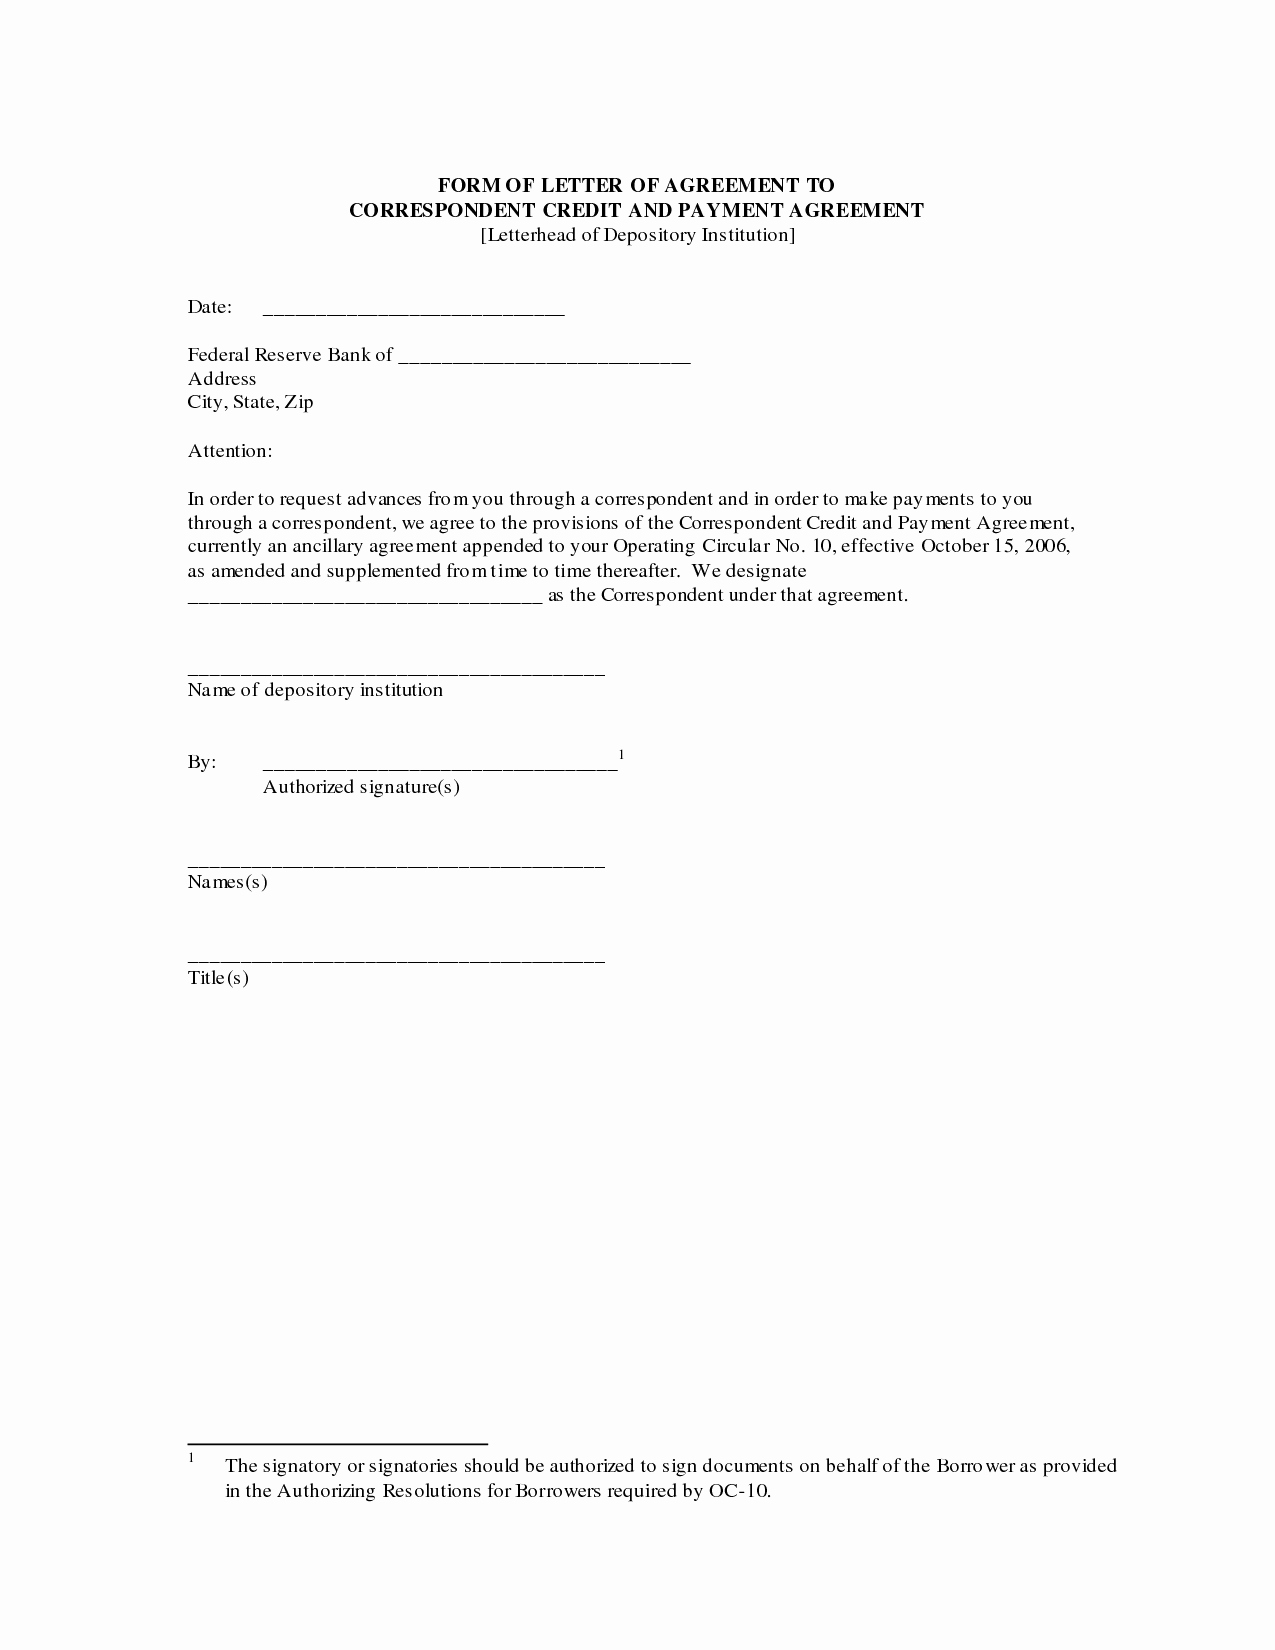 Letter Of Agreement Template New Agreement Letter Free Printable Documents